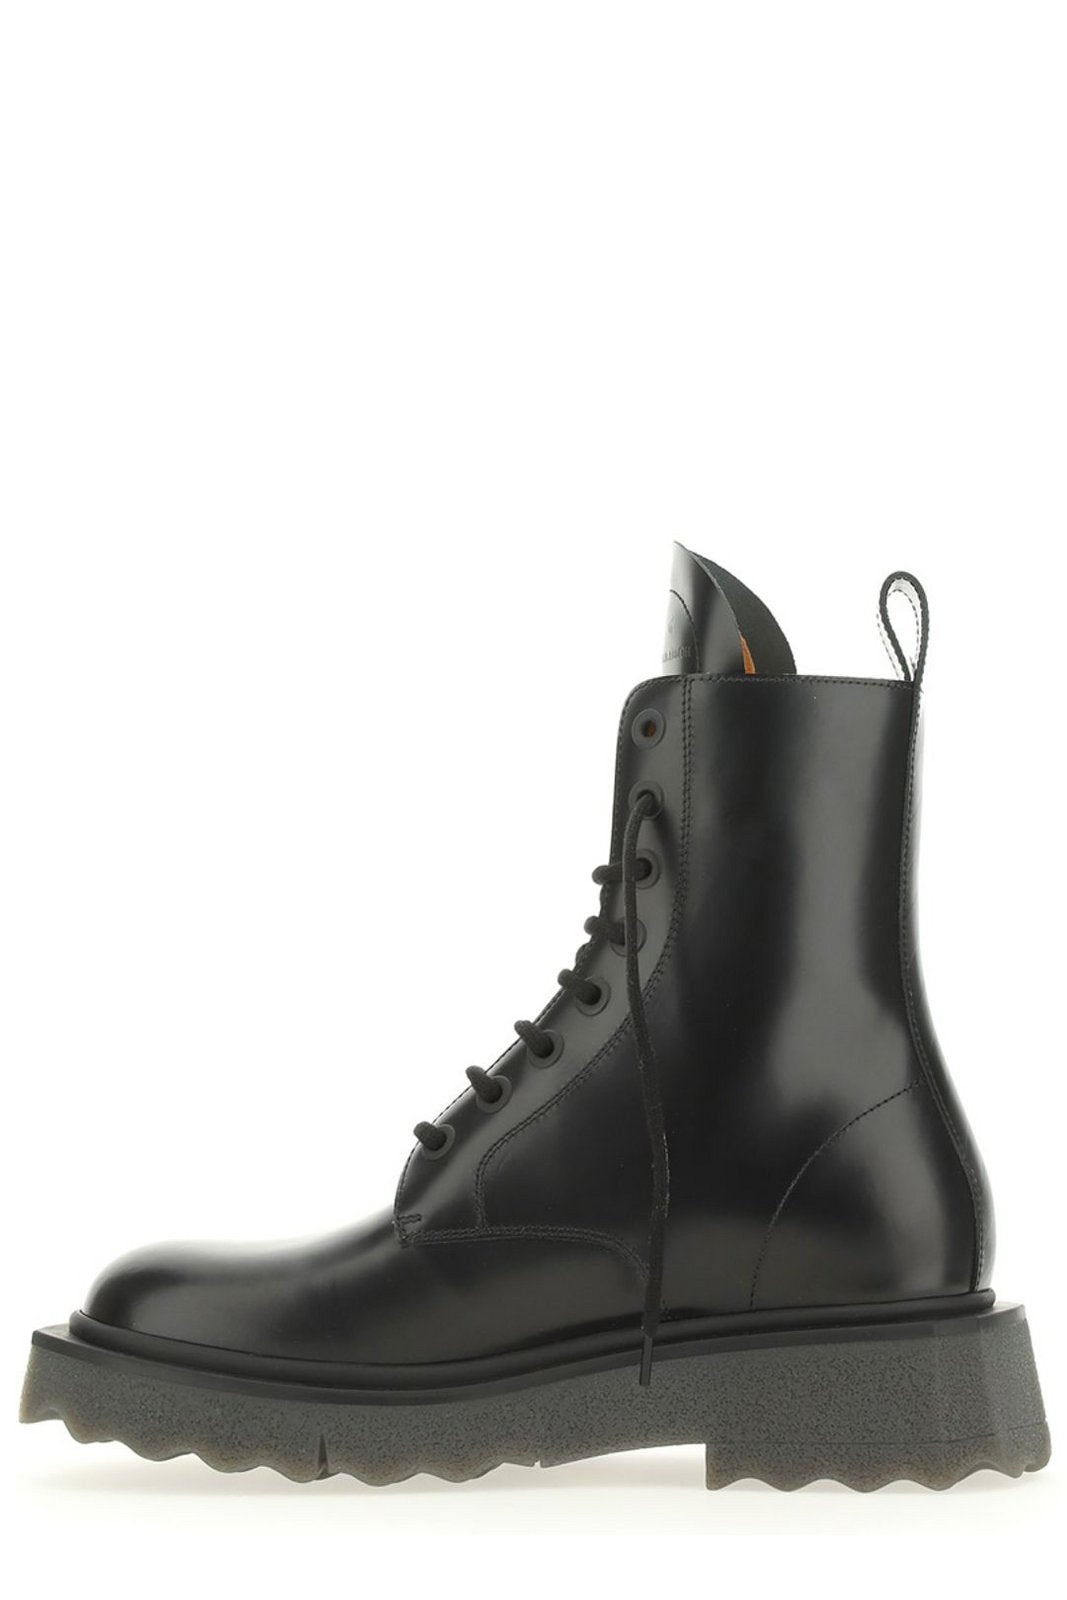 Off-White Round Toe Combat Boots